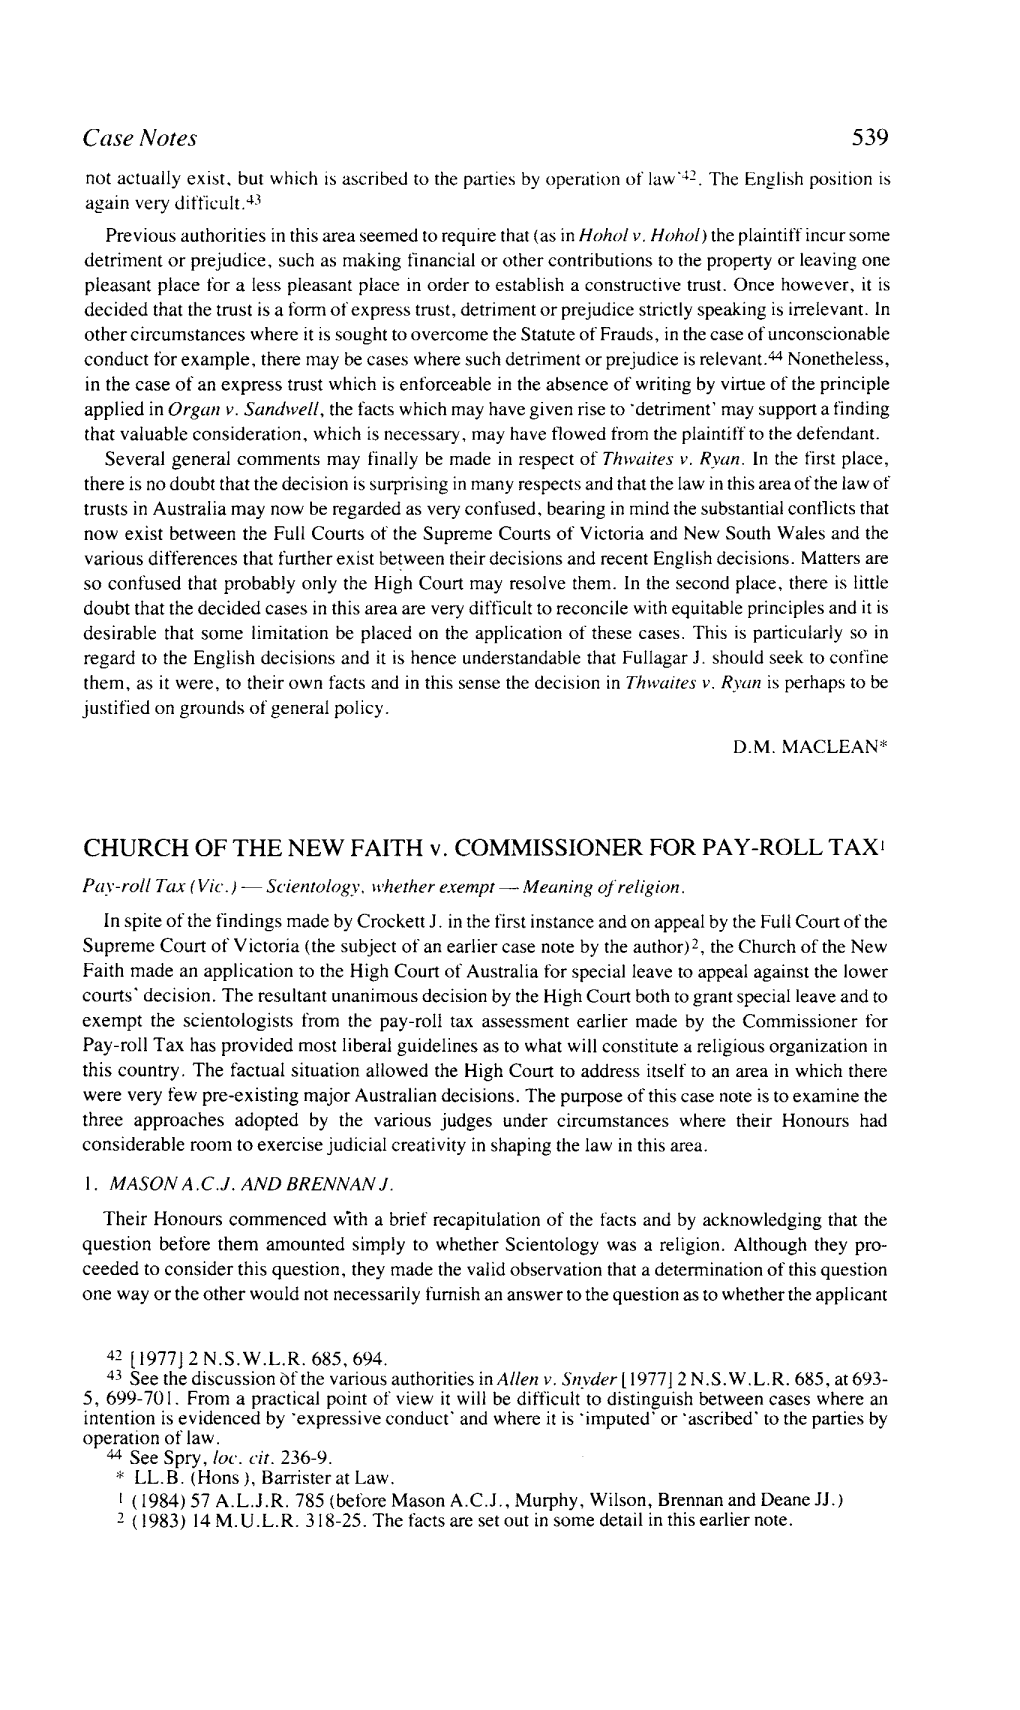 Case Notes 539 CHURCH of the NEW FAITH V. COMMISSIONER